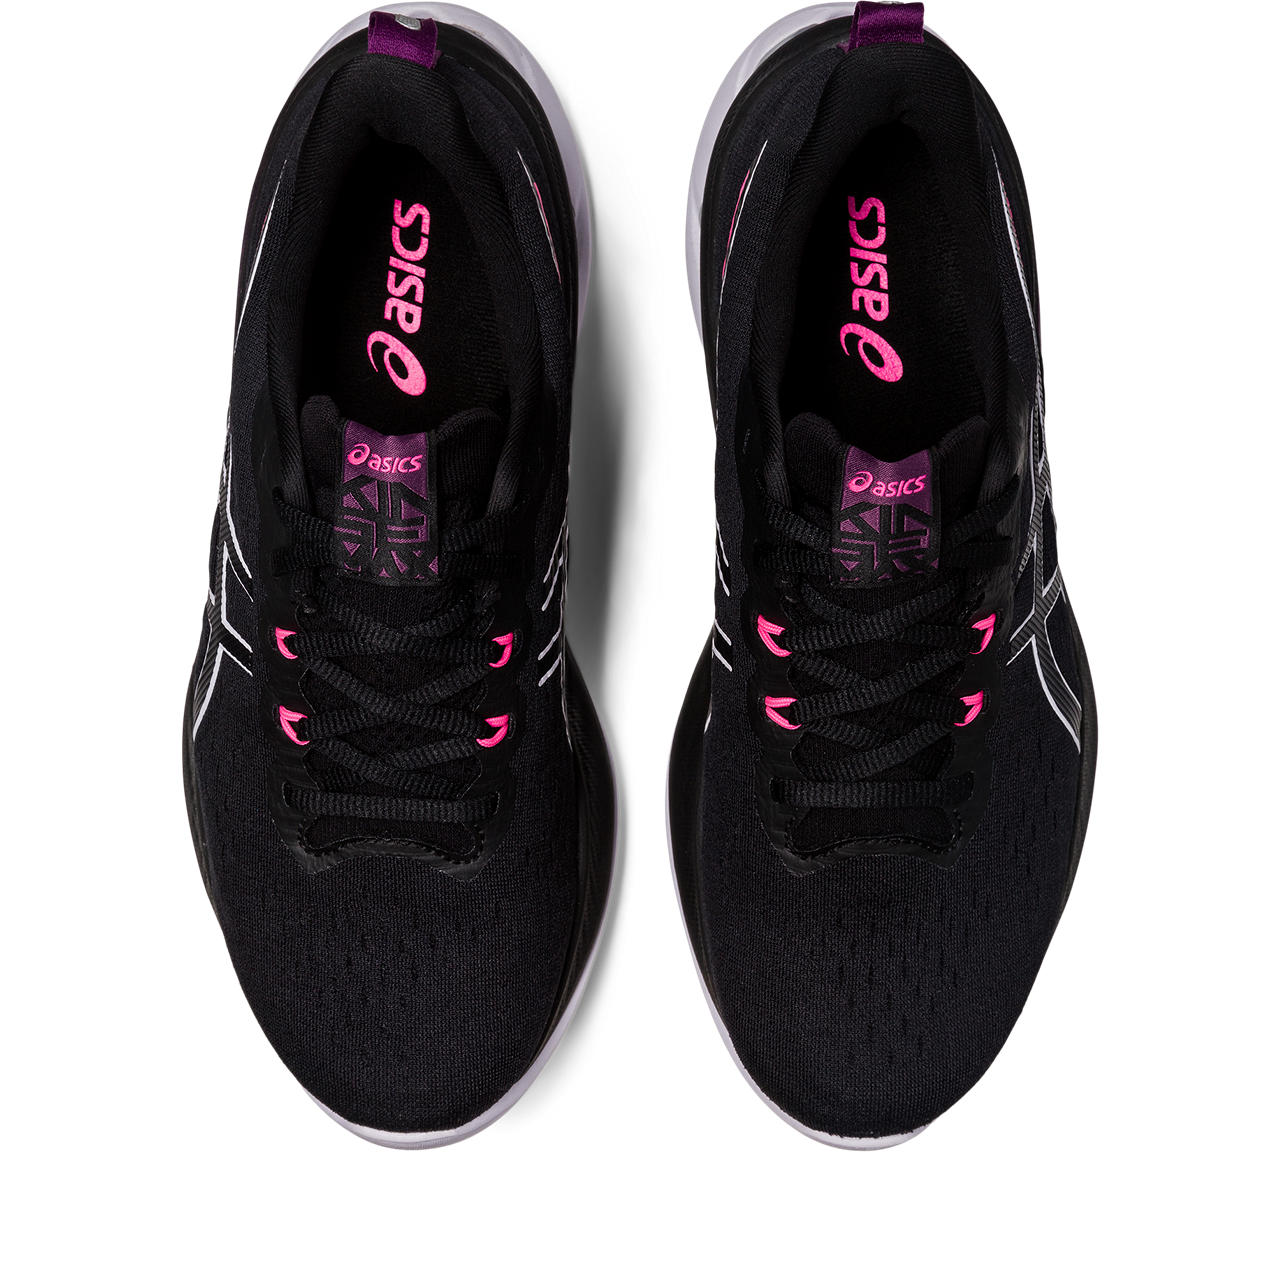 The Kinsei max is a great looking shoe with a comfortable upper and lots of Gel for cushion